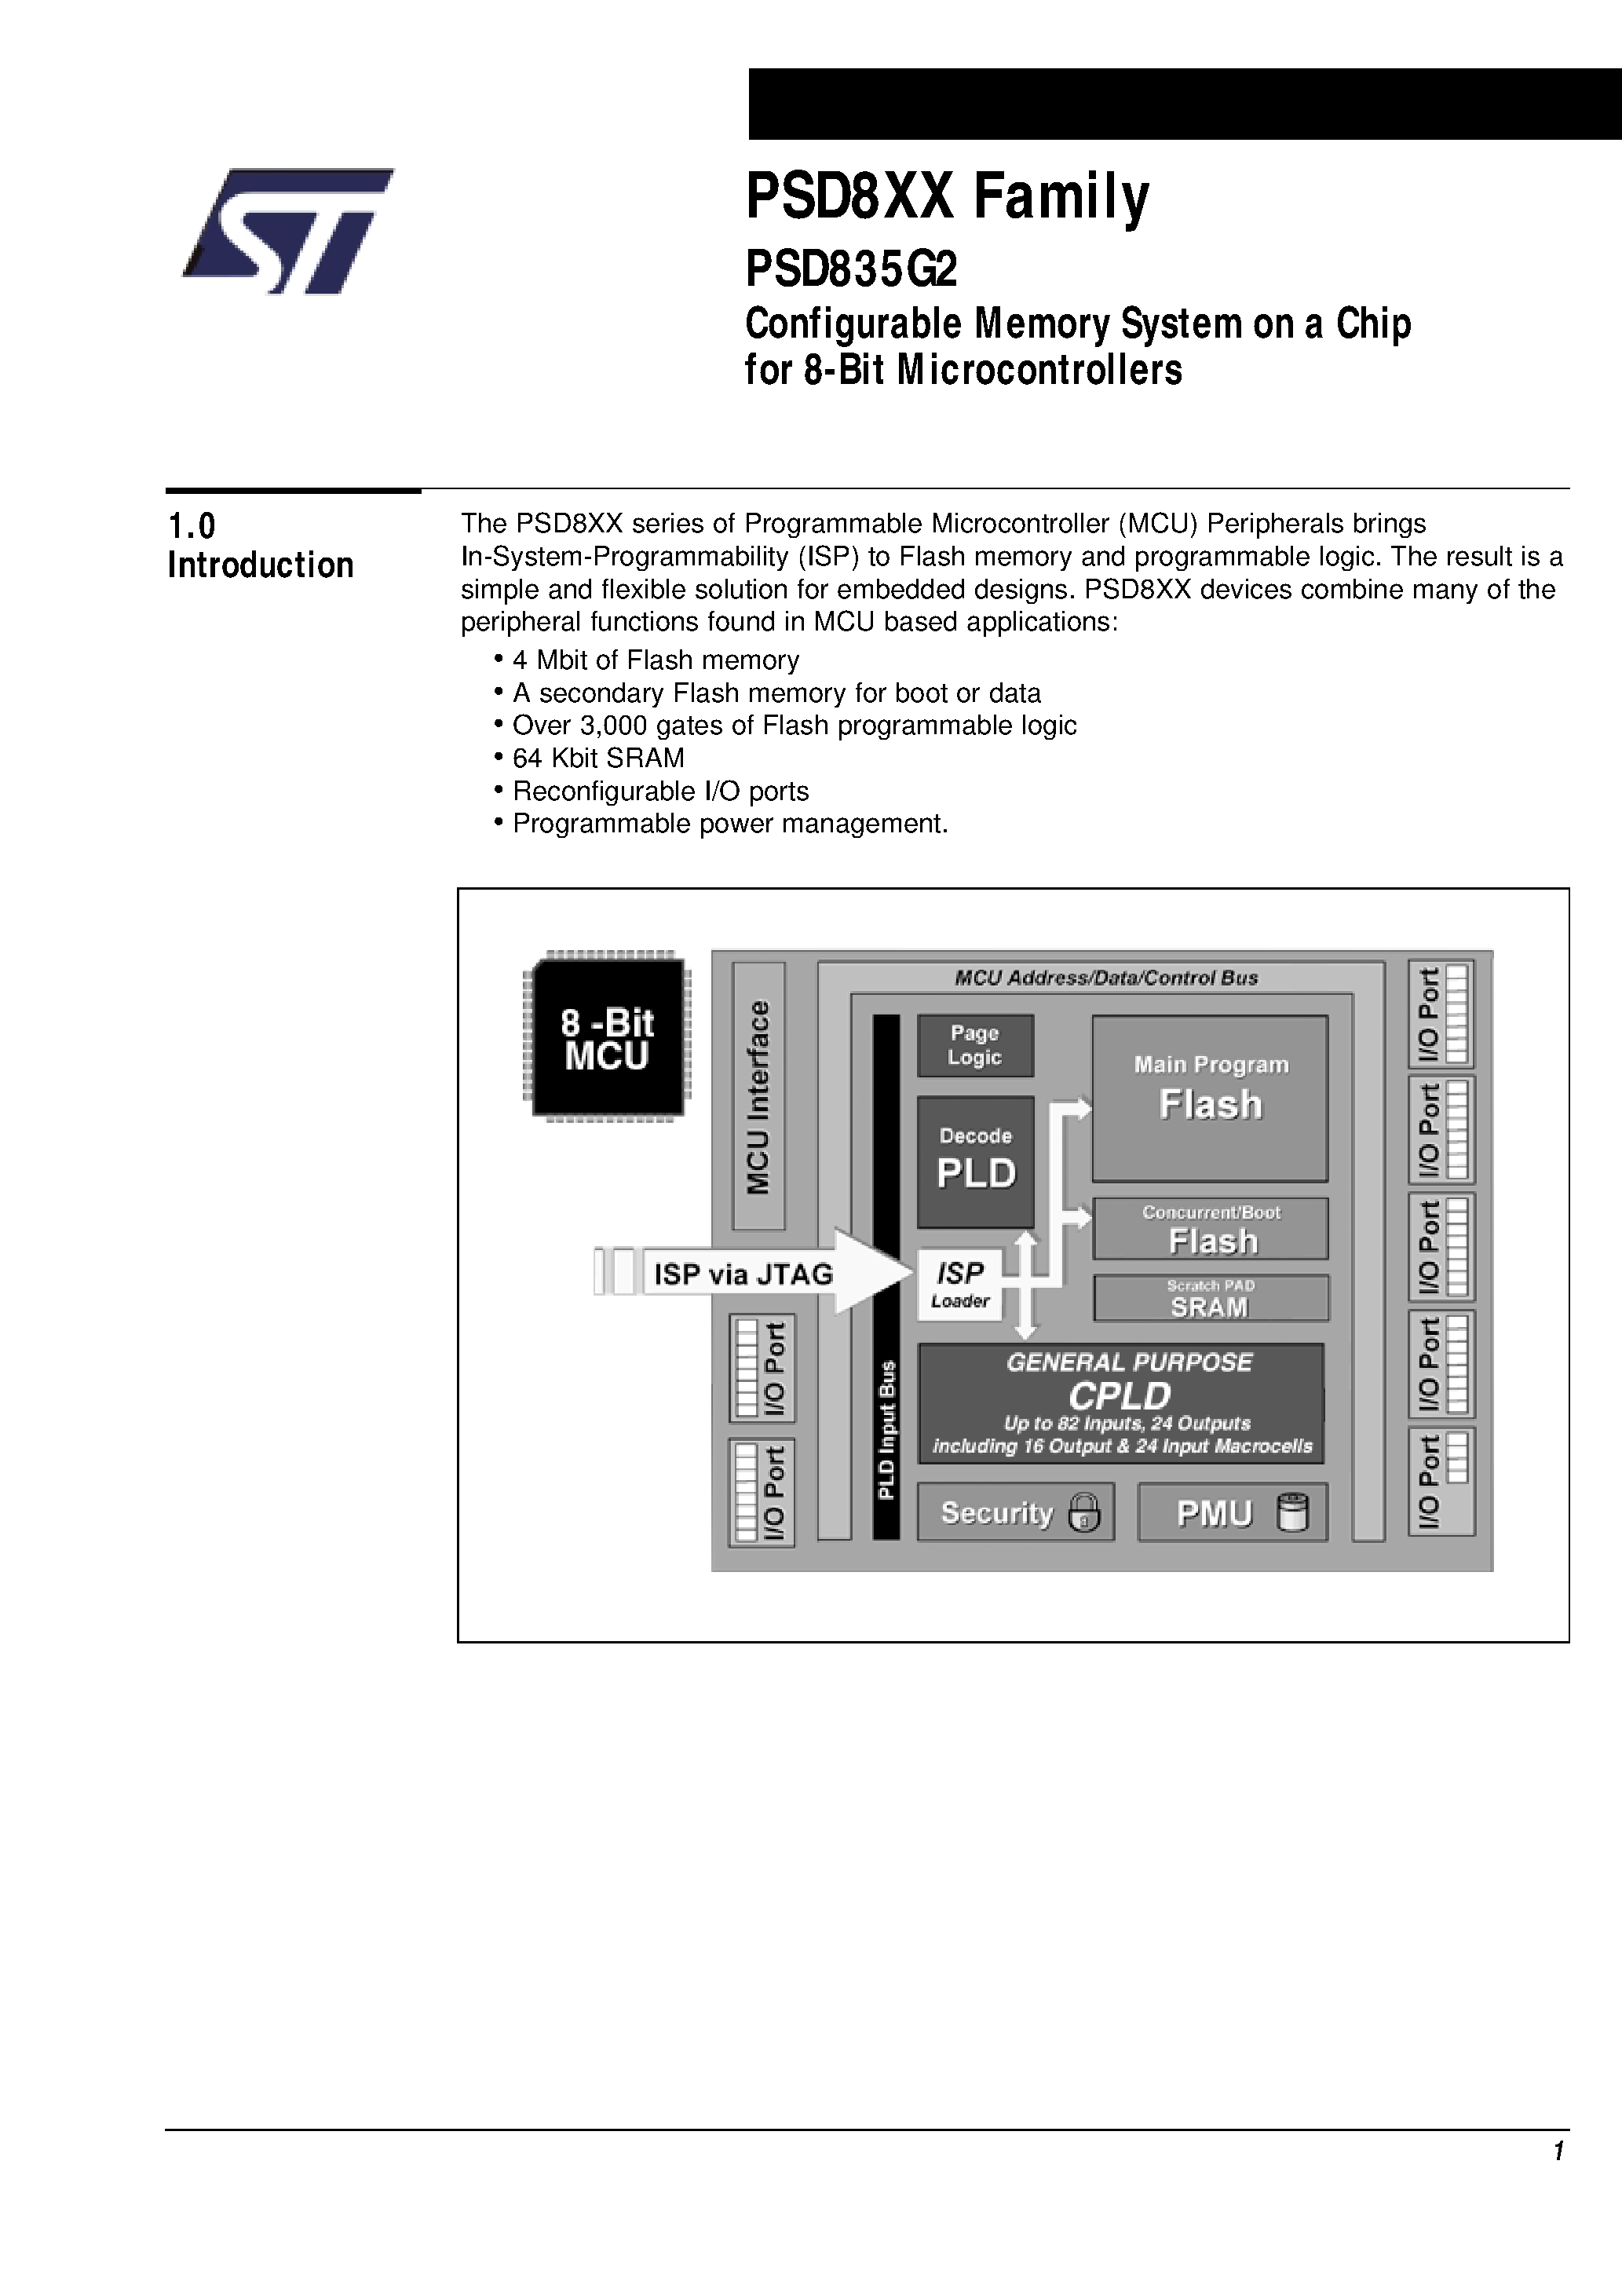 Datasheet PSD835F1V-A-12B81I - Configurable Memory System on a Chip for 8-Bit Microcontrollers page 2